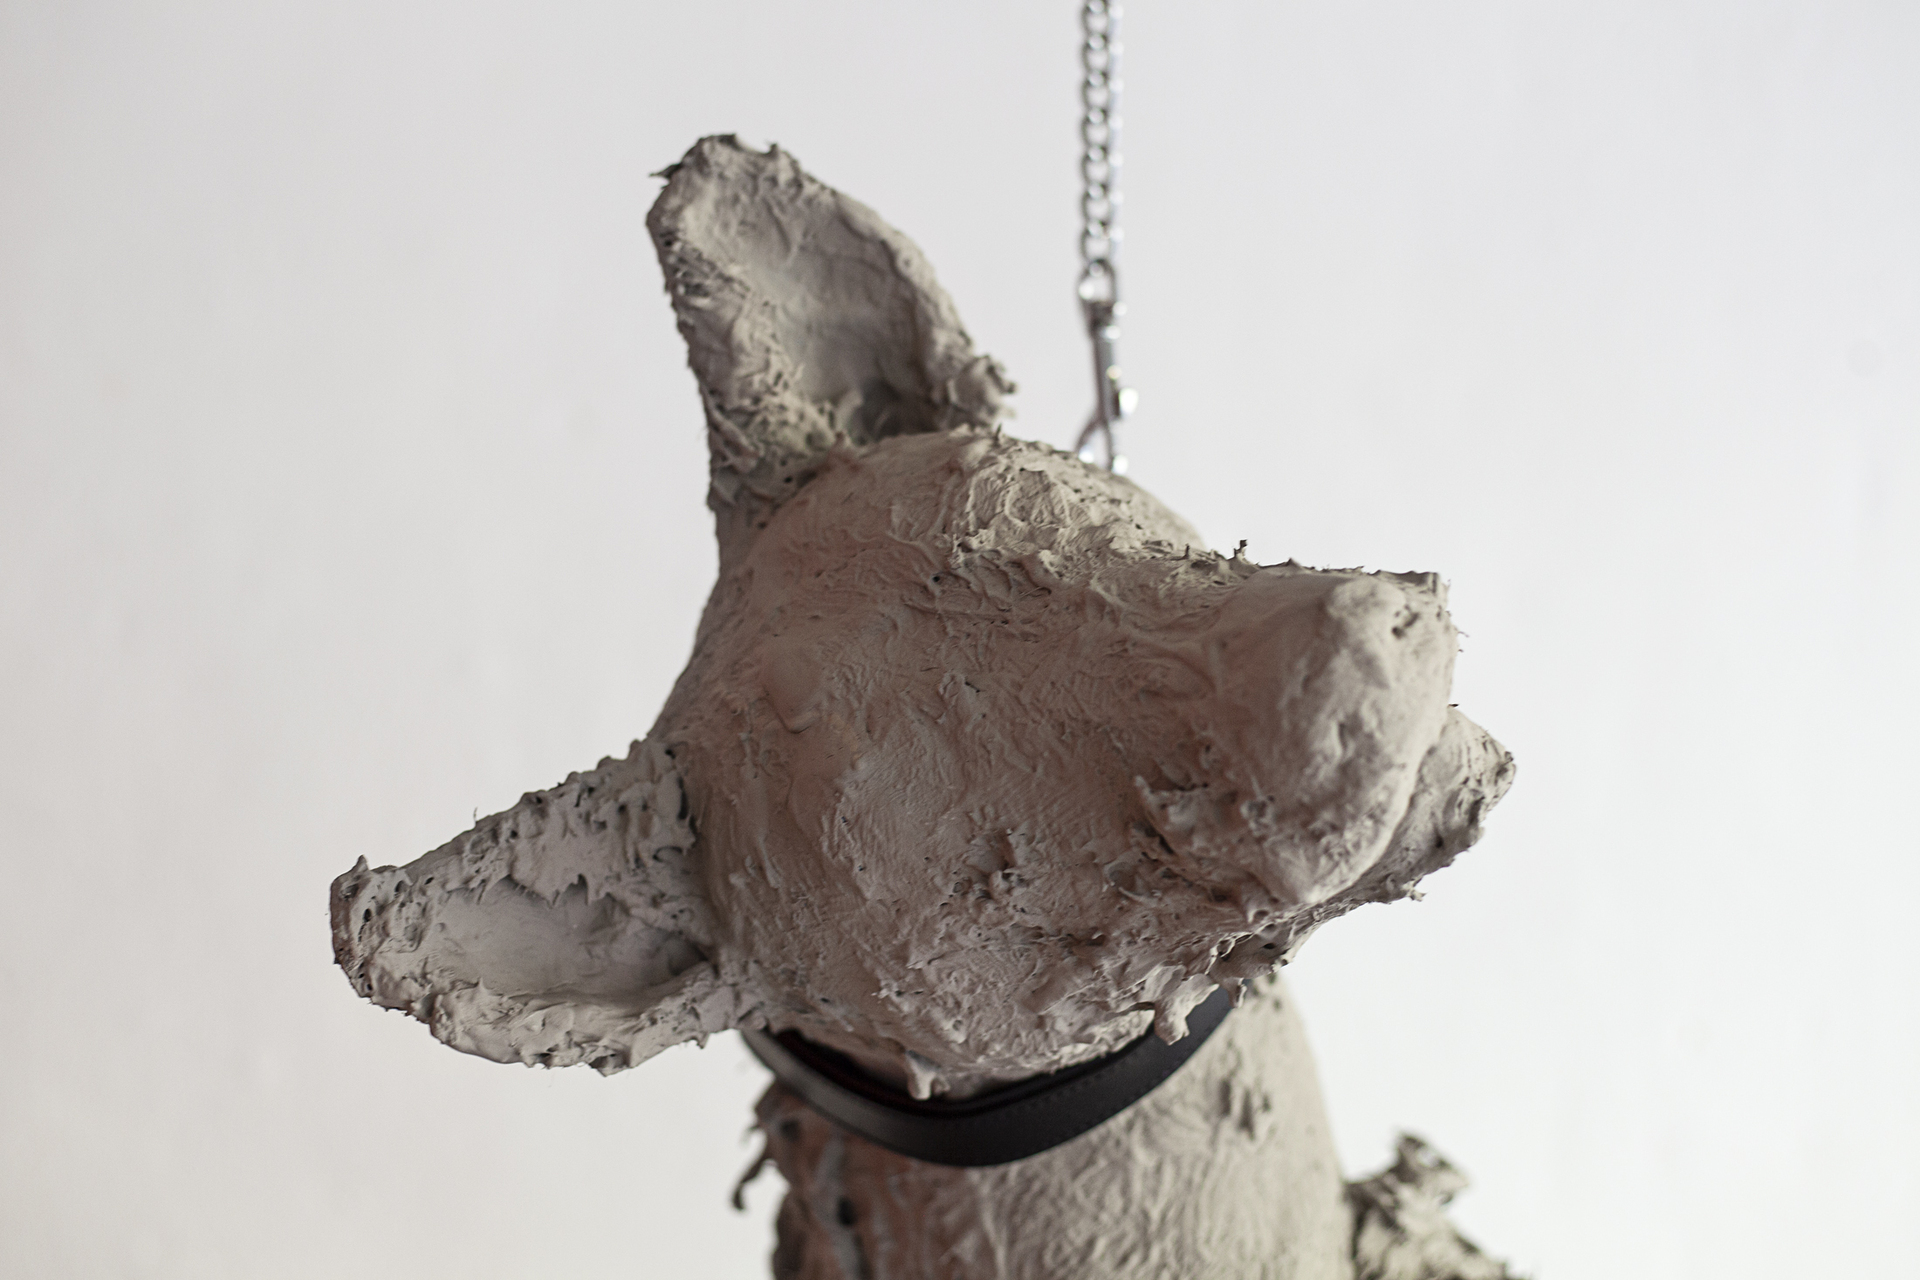 Nicolás Astorga, Hijo de perra (You'll never be good enough) (detail), 2022, Upcycled taxidermy, concrete glaze, leather, steel, 234 x 70 x 101 cm